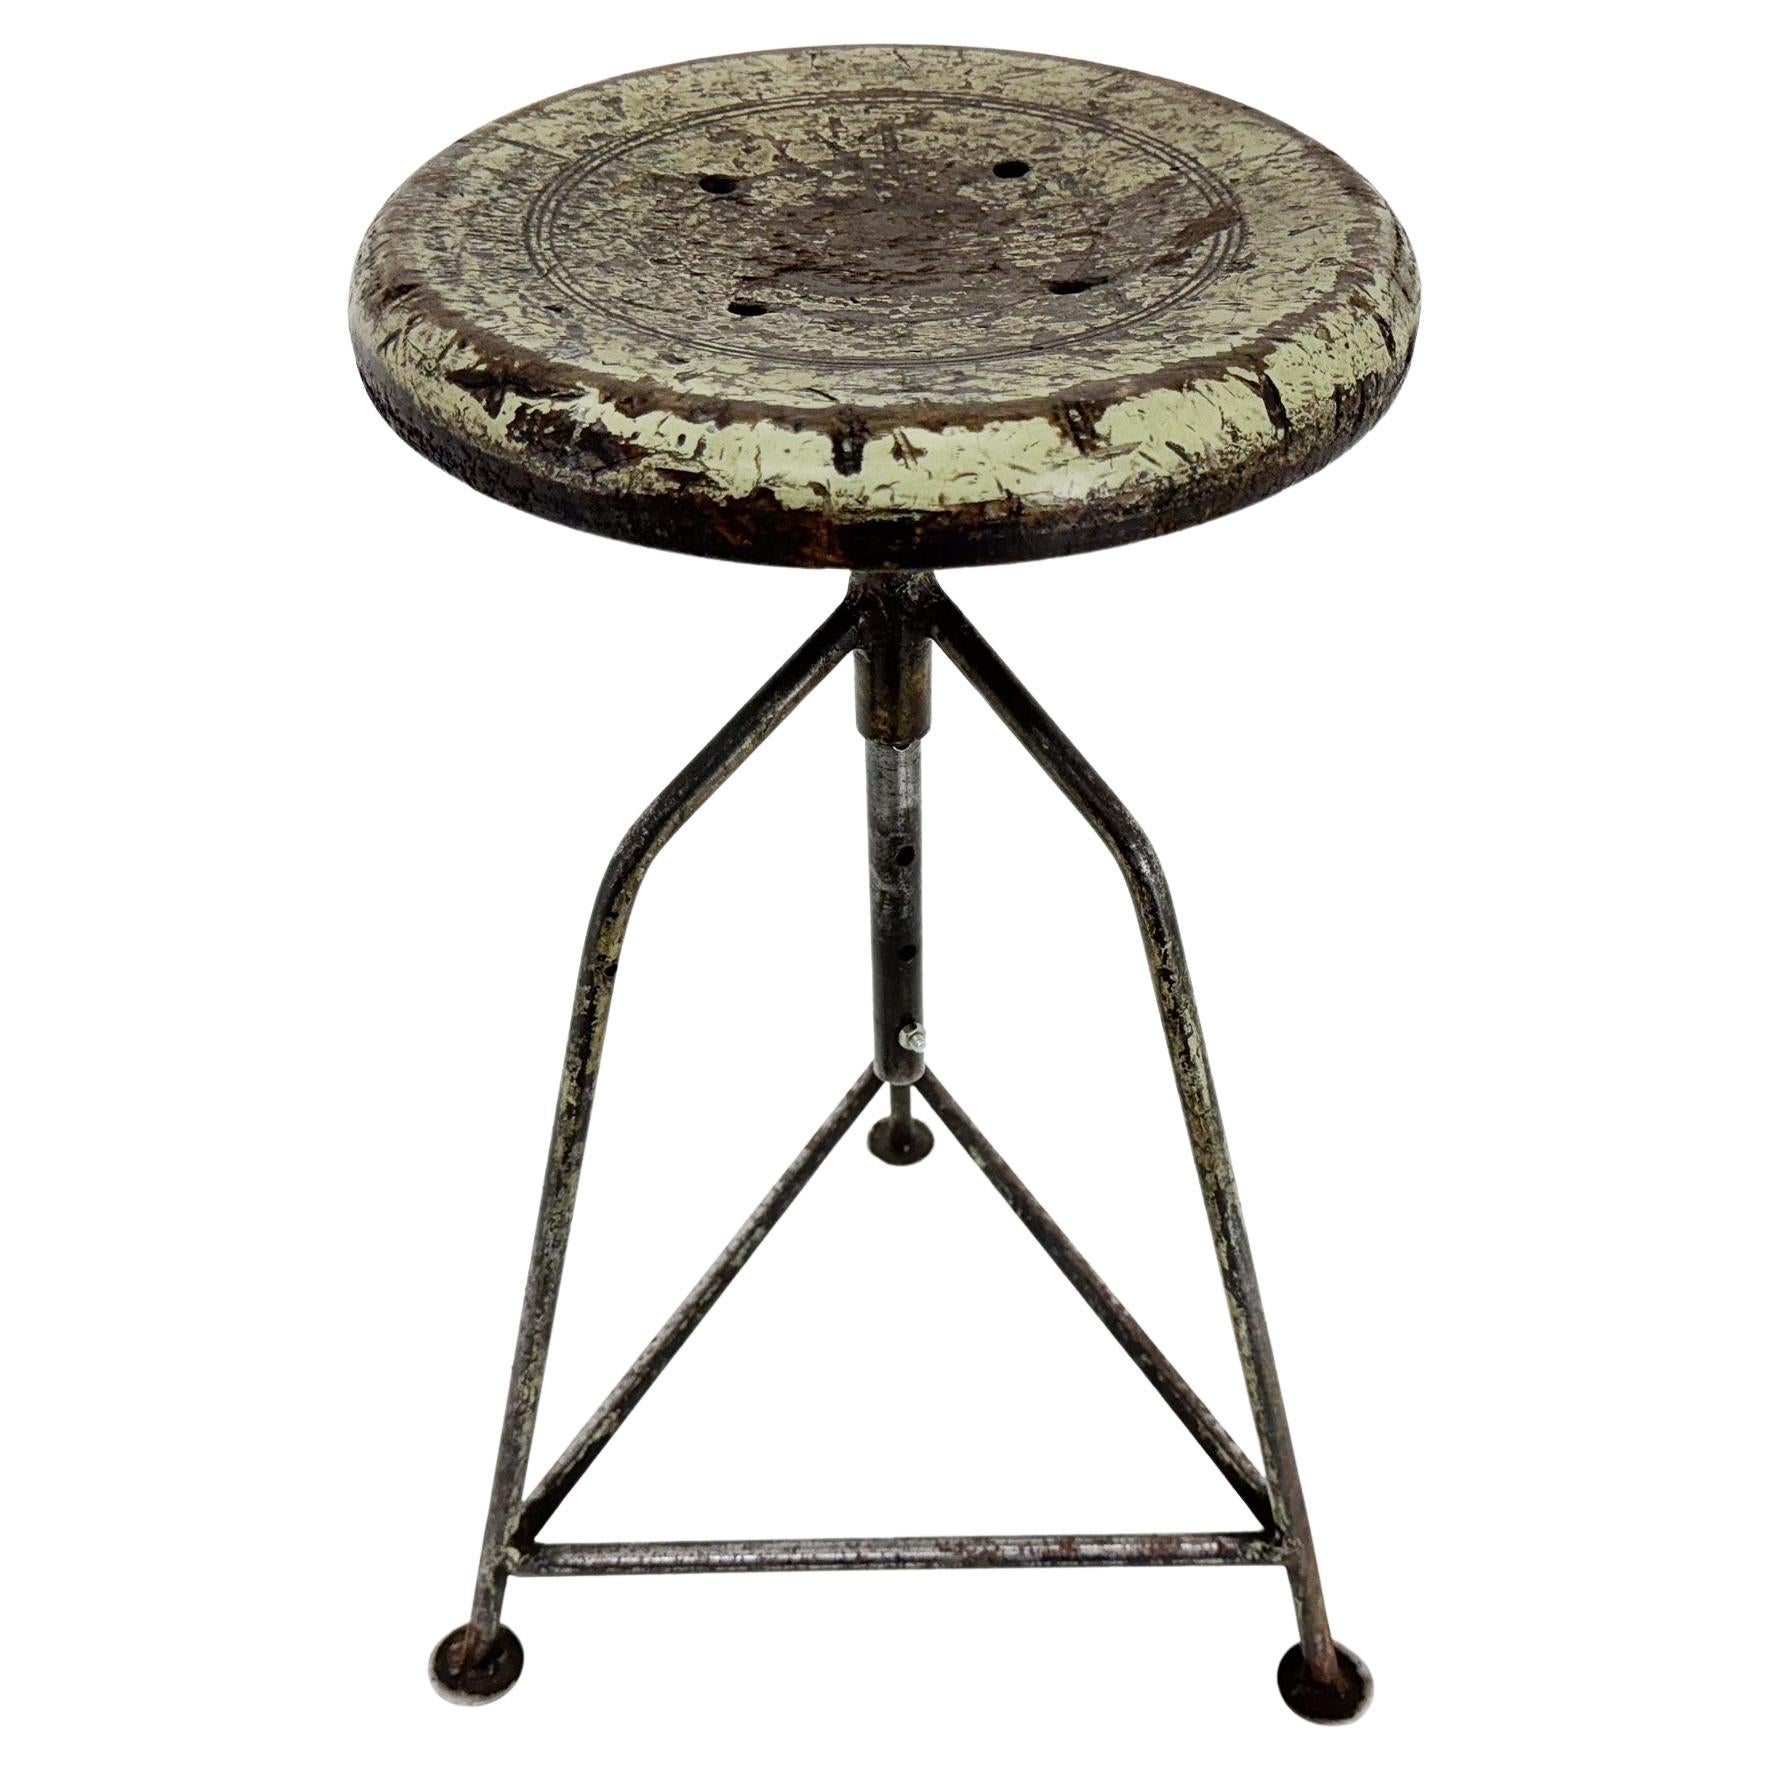 Vintage Industrial Steel & Wood Tripod Stool with Original Patina, 1950's For Sale